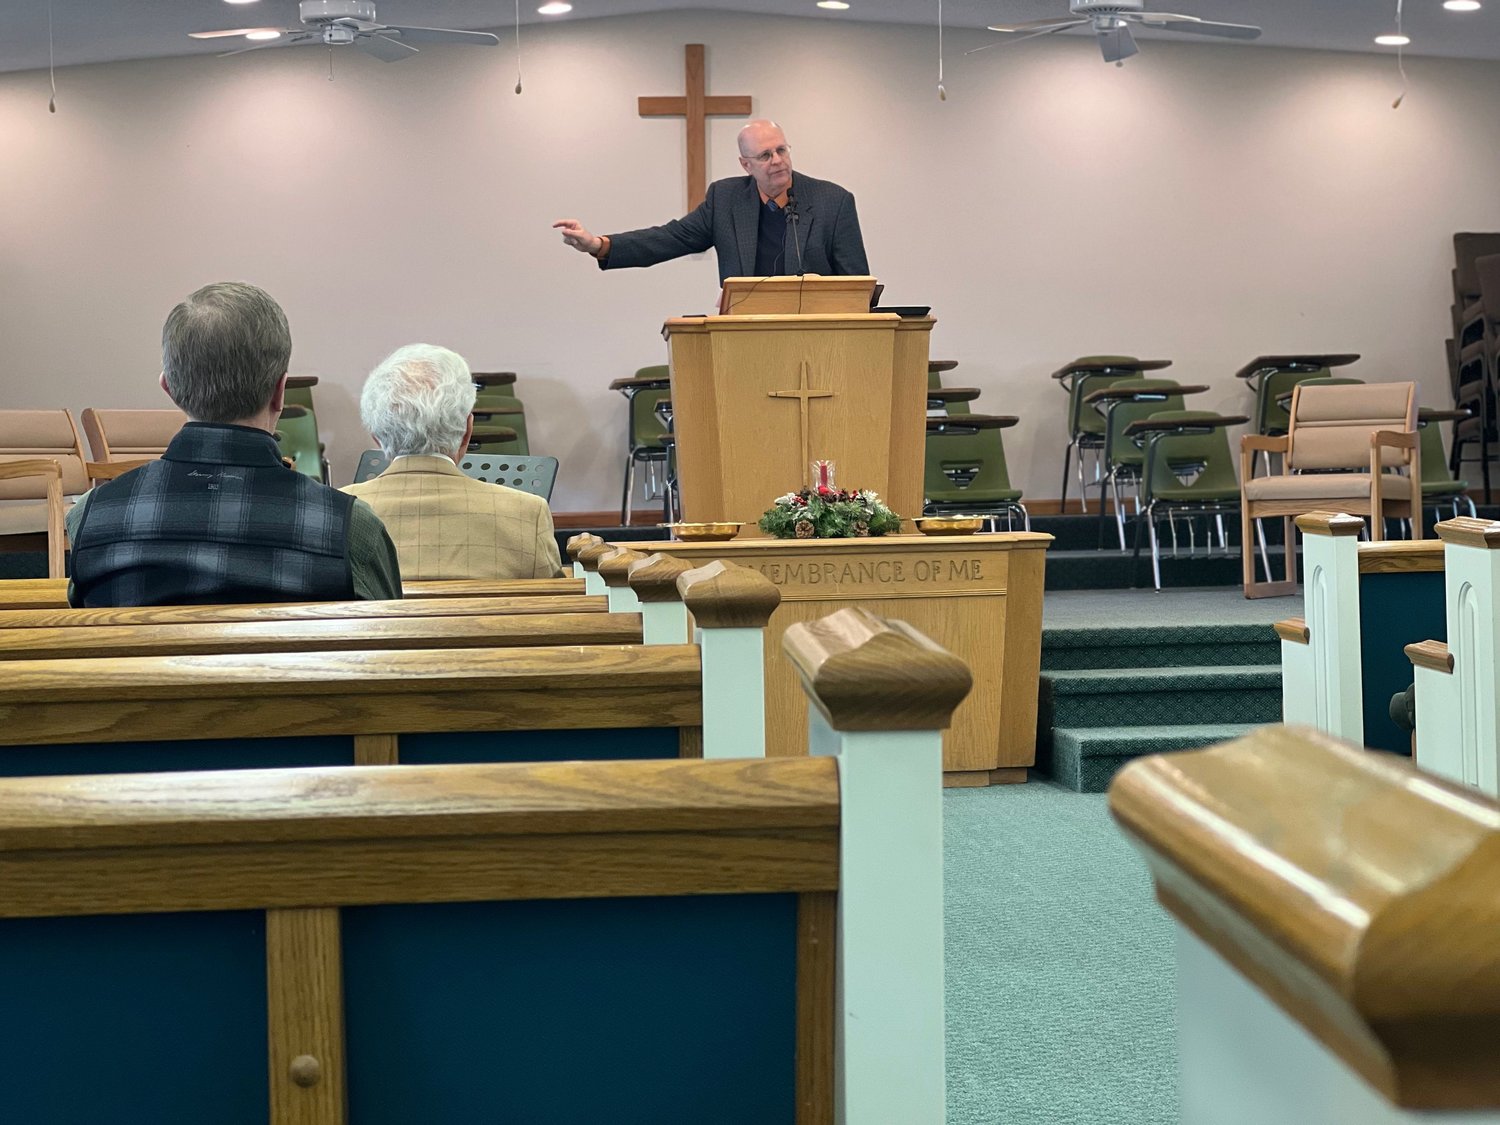 Rusty Chatfield, father of former House Speaker Lee Chatfield, speaks to a Sunday morning congregation at Northern Michigan Baptist Bible Church.